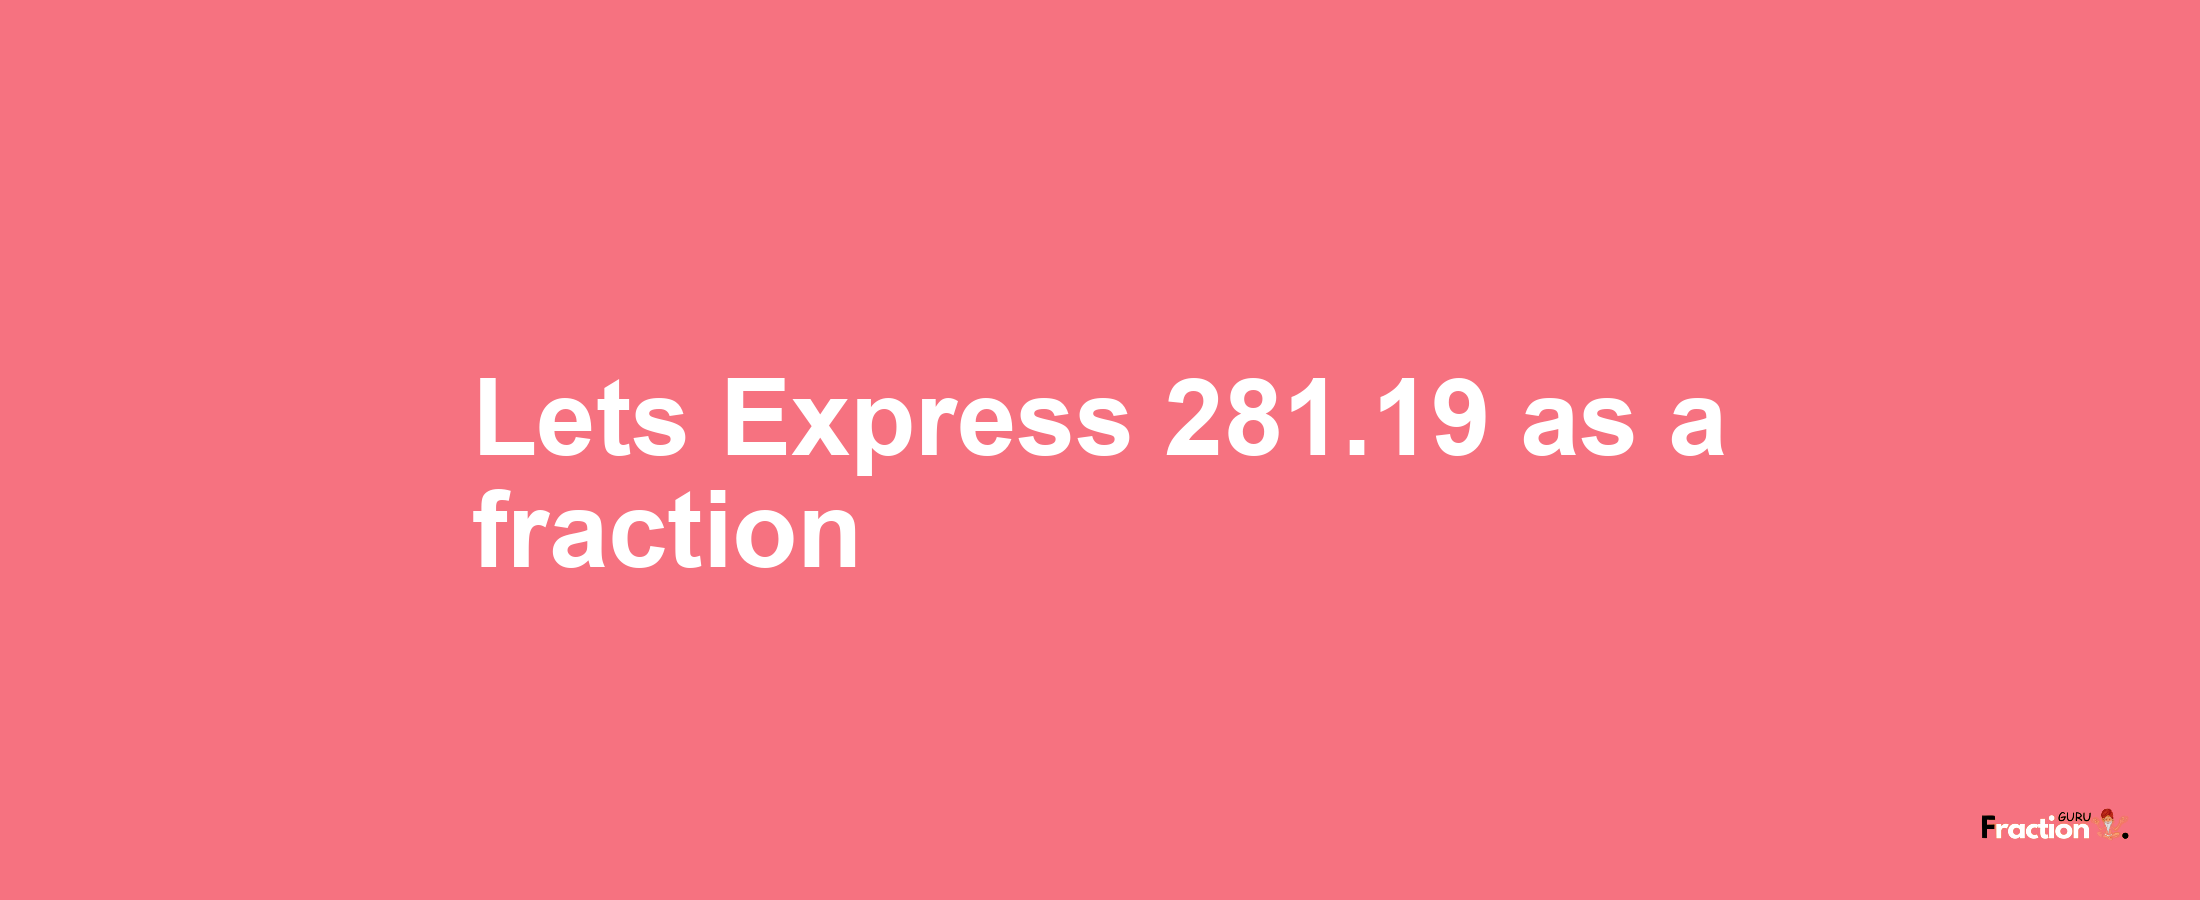 Lets Express 281.19 as afraction